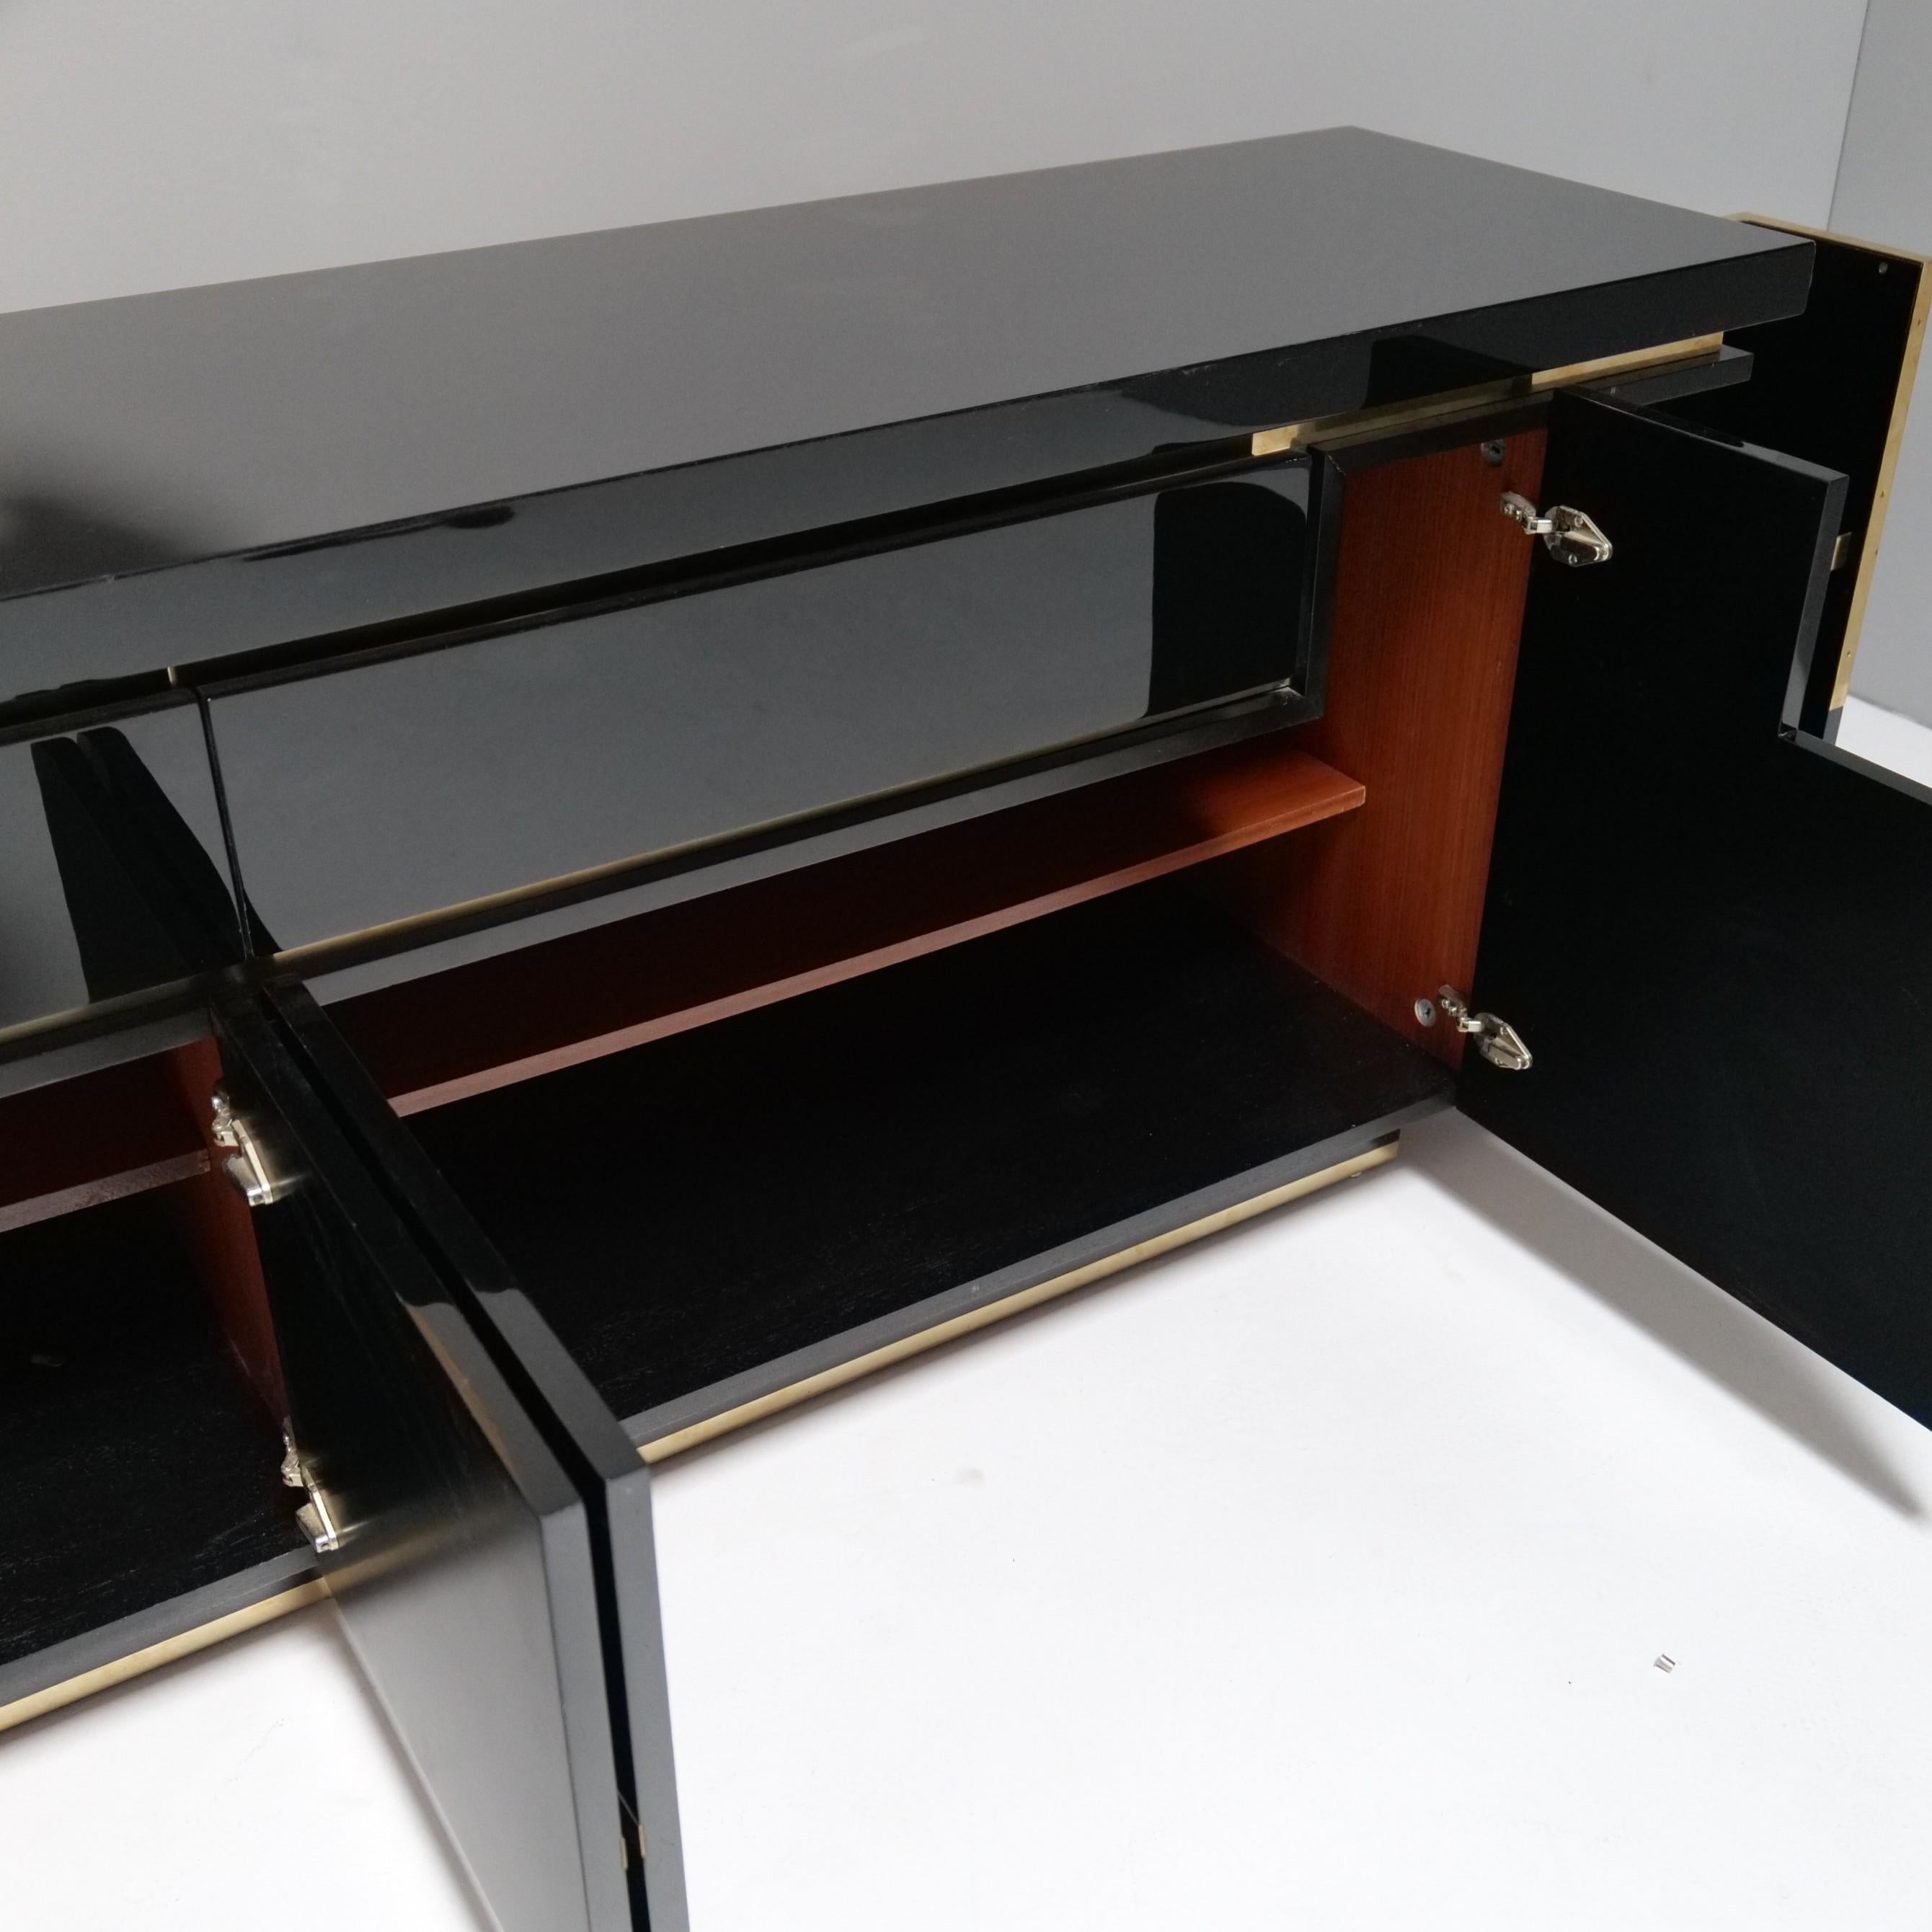 Jean Claude Mahey Highgloss Black Lacquer Sideboard, 1970s For Sale 8